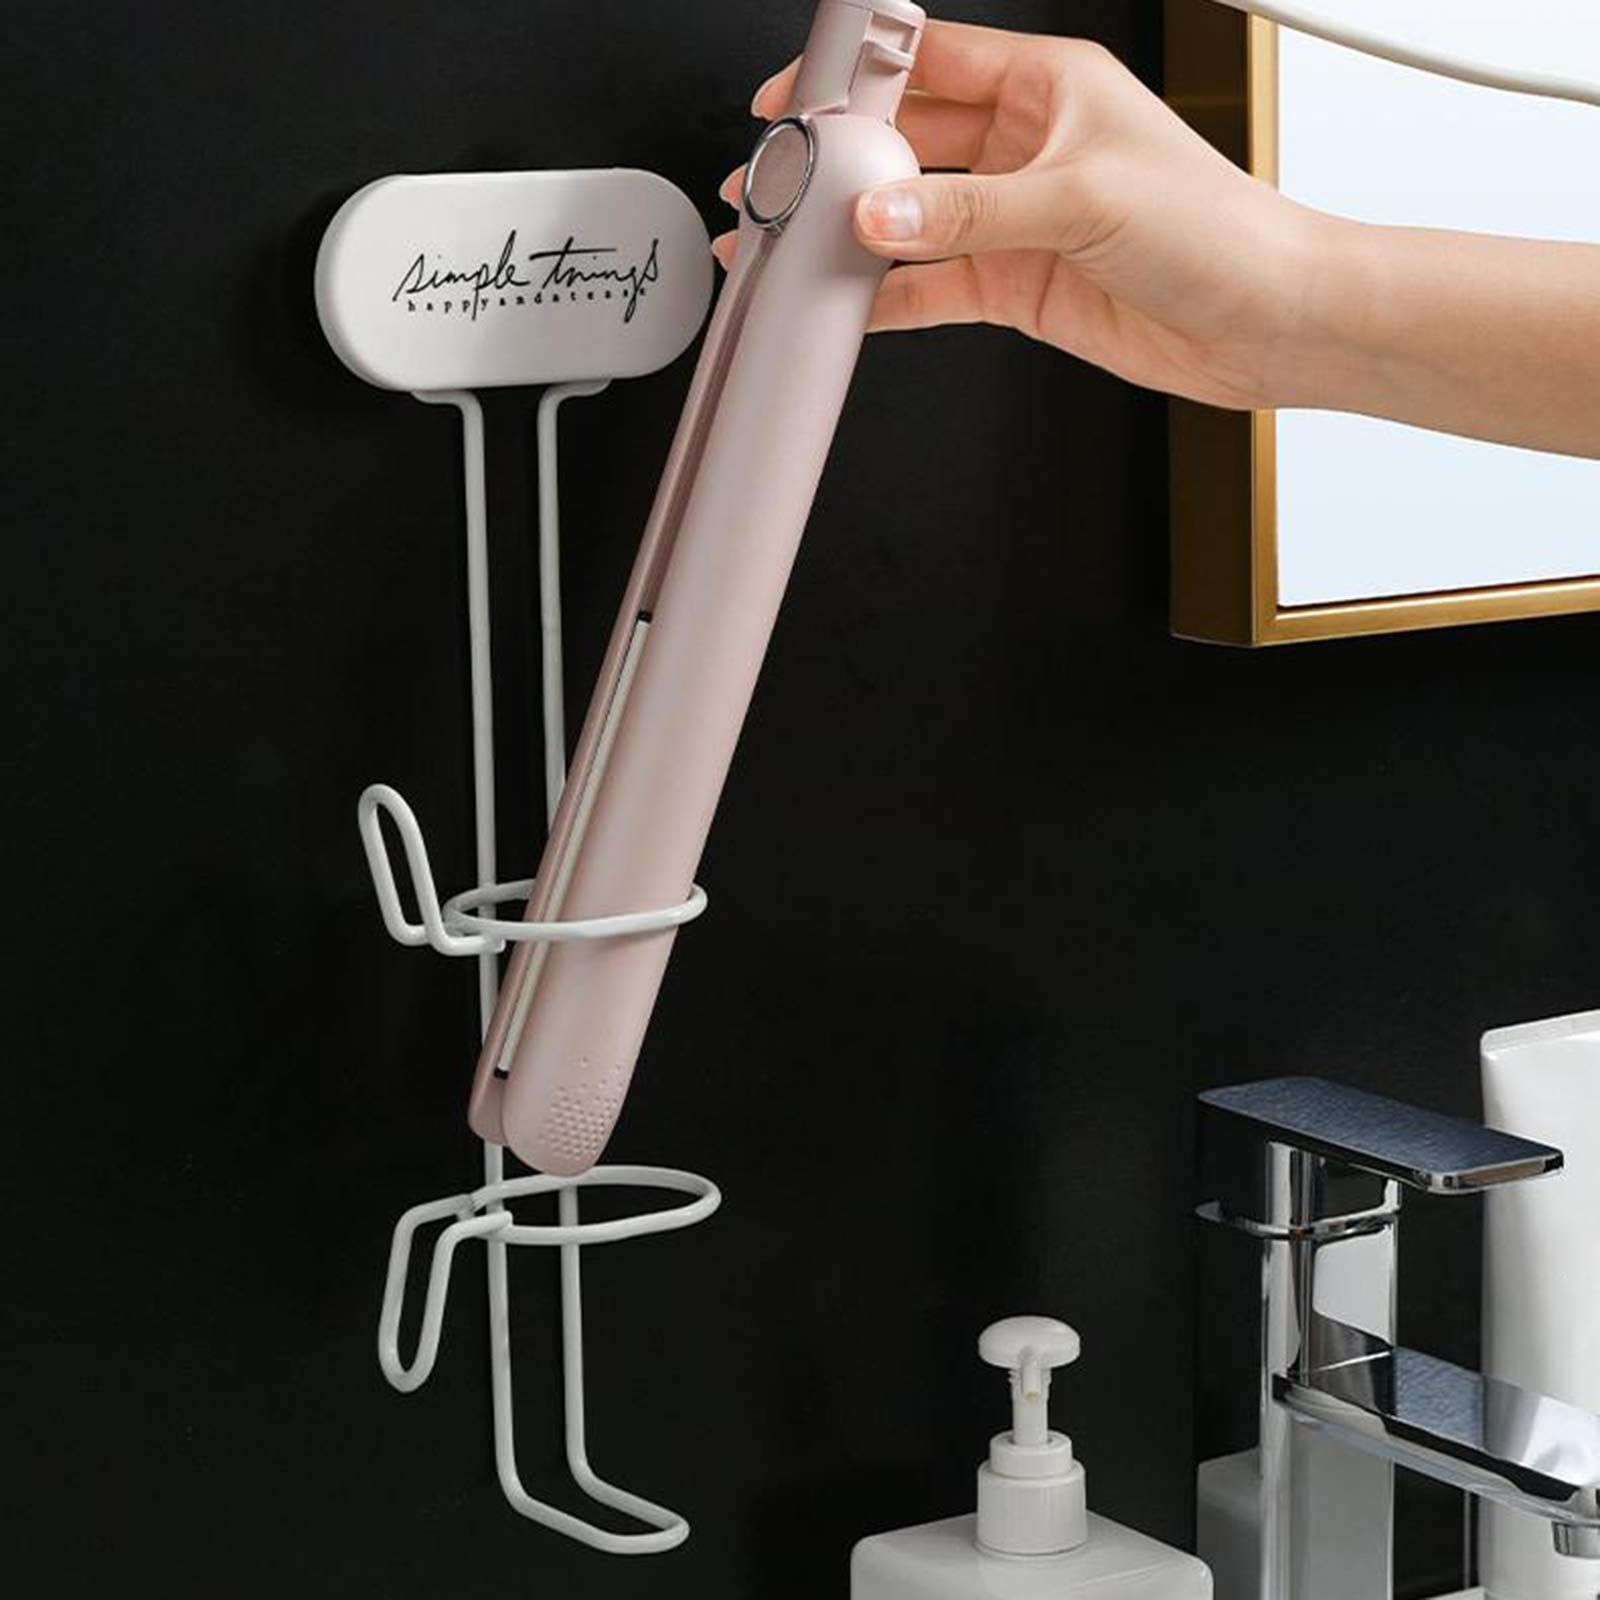 F8C503Y Bathroom Accessories Holder Organizer Stick Stand for Flat Irons Hair Straightener Hanging Rack Hair Tool Organizer Wall Mounted Hair Dryer Holder